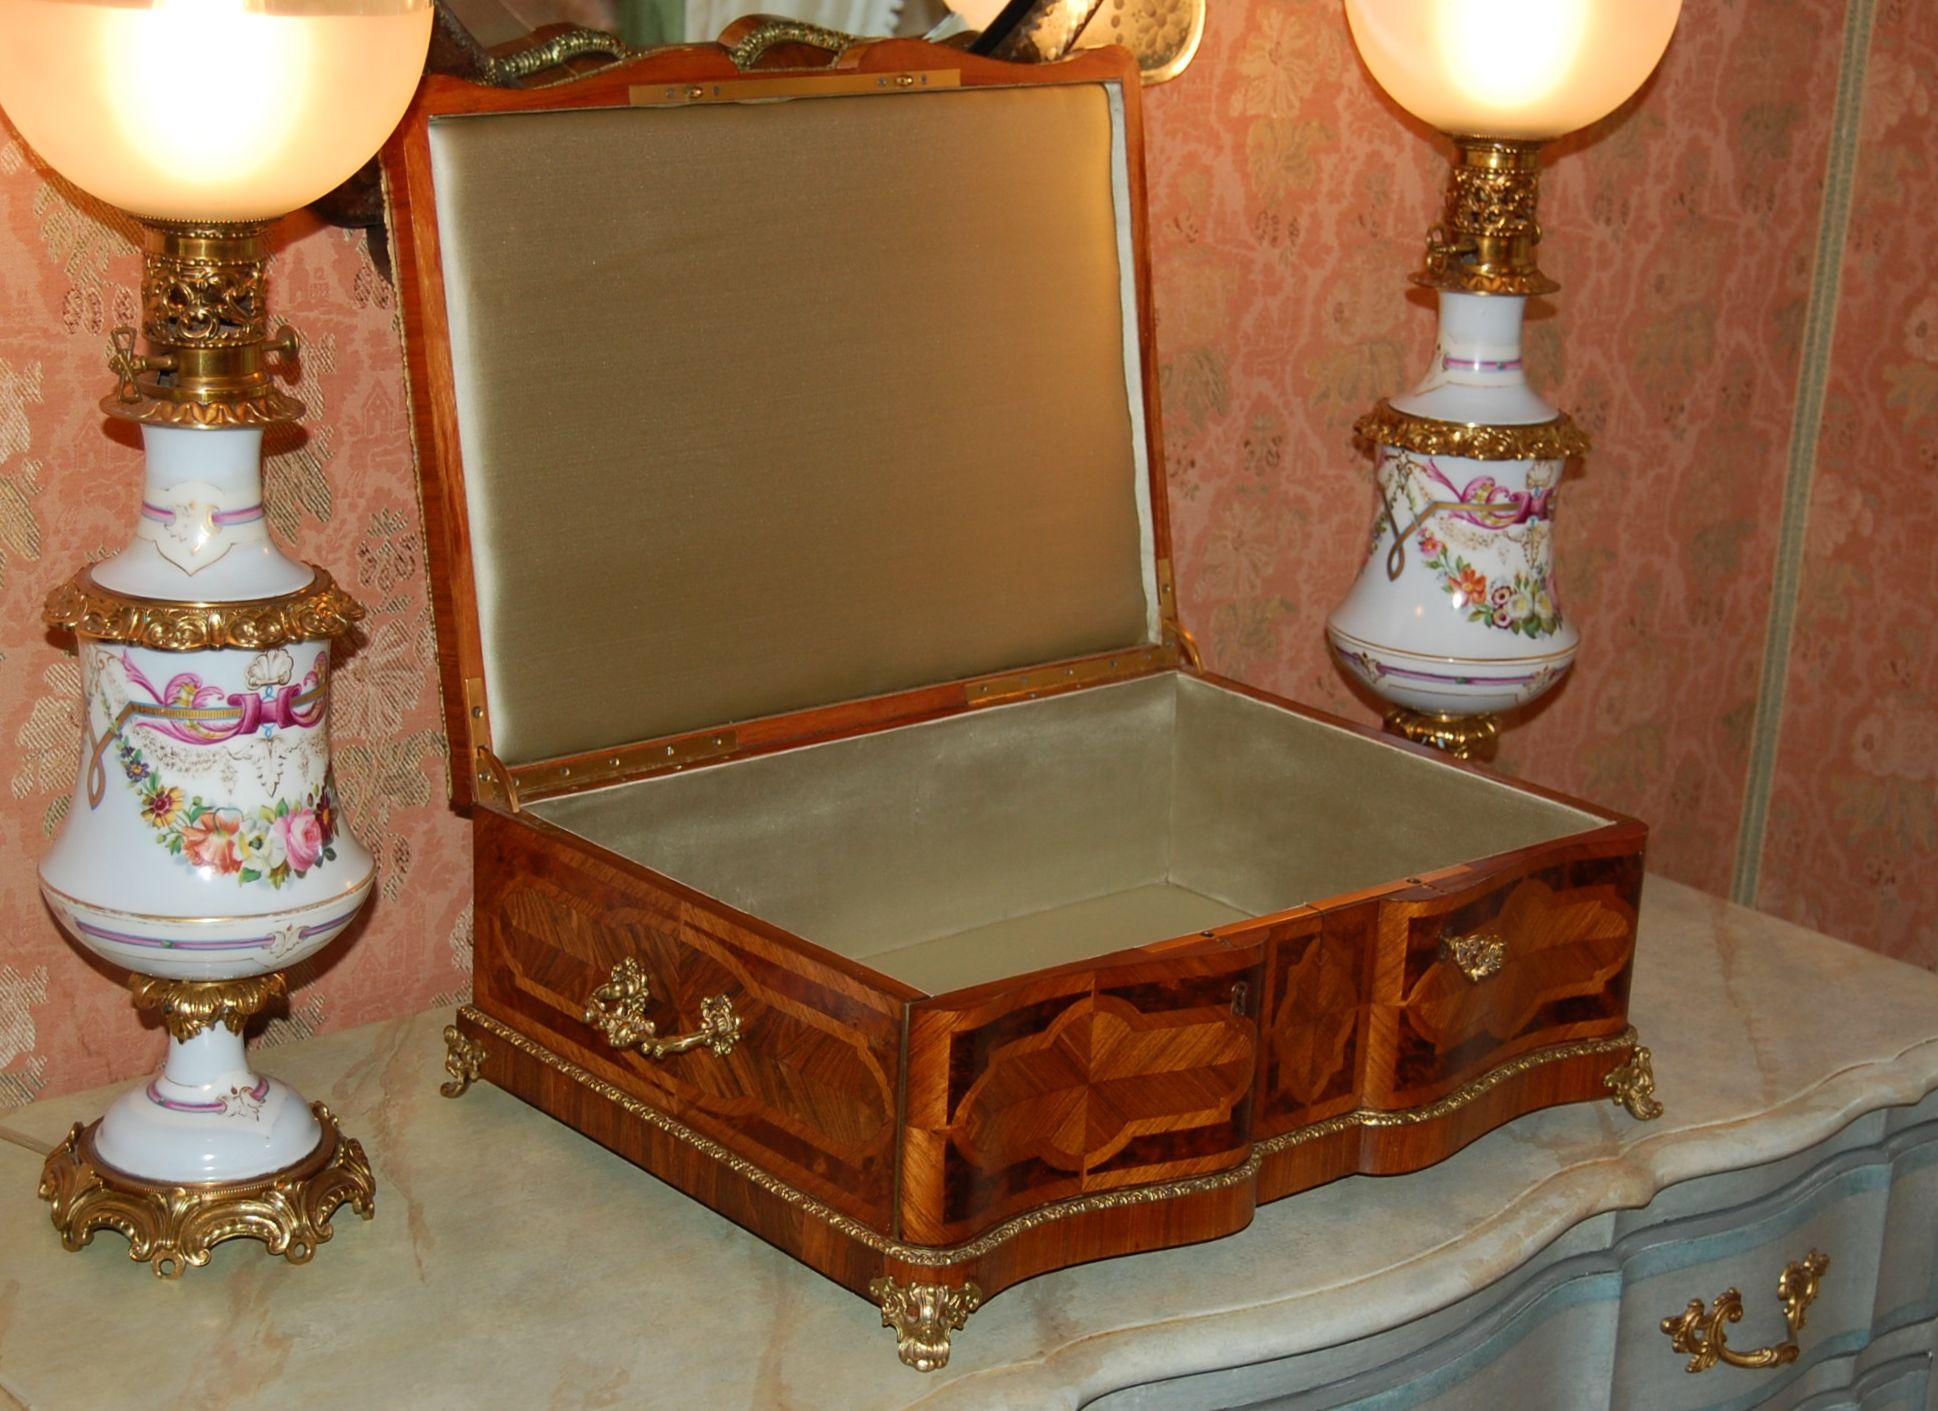 A grand size neoclassical style dresser box used for jewelry or documents with Parquetry designs on the lid and all four sides, possibly Russian in origin. Decorative brass bands run the perimeter of the lid and the base, with four brass feet and